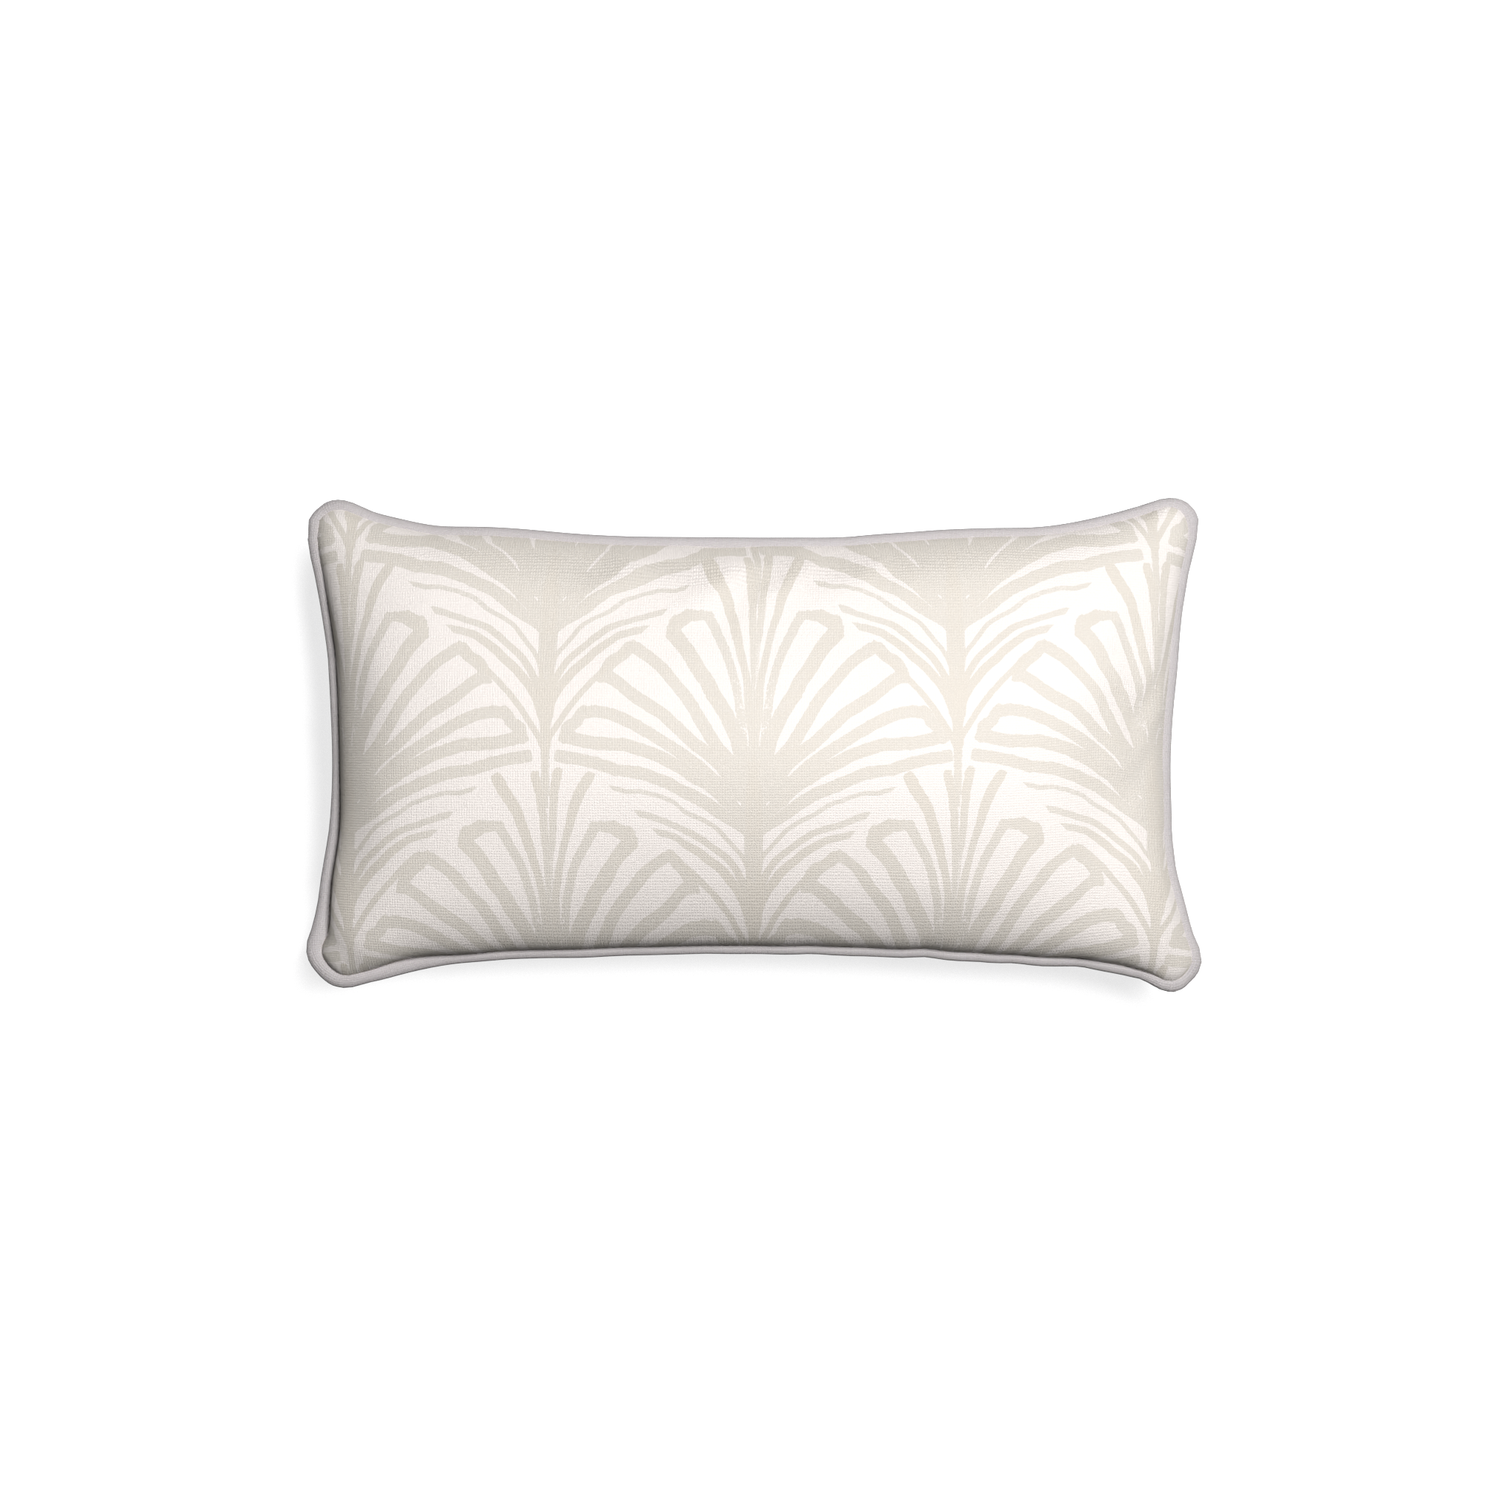 Petite-lumbar suzy sand custom beige palmpillow with pebble piping on white background